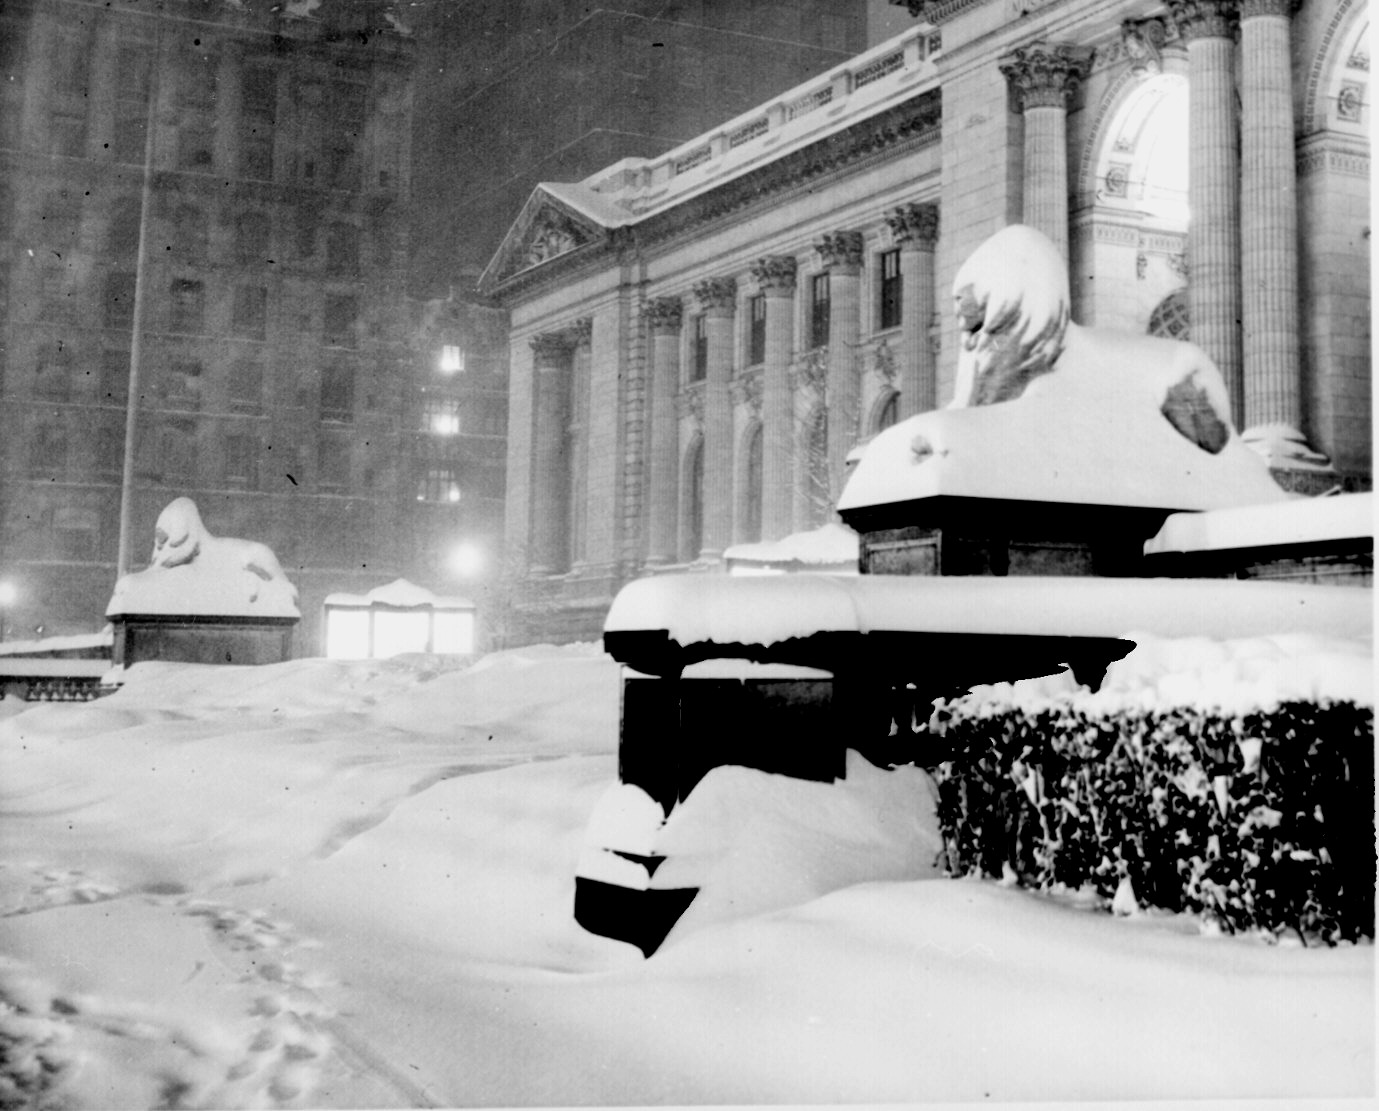 New_york_public_library_1948 snowstorm.....might be of use